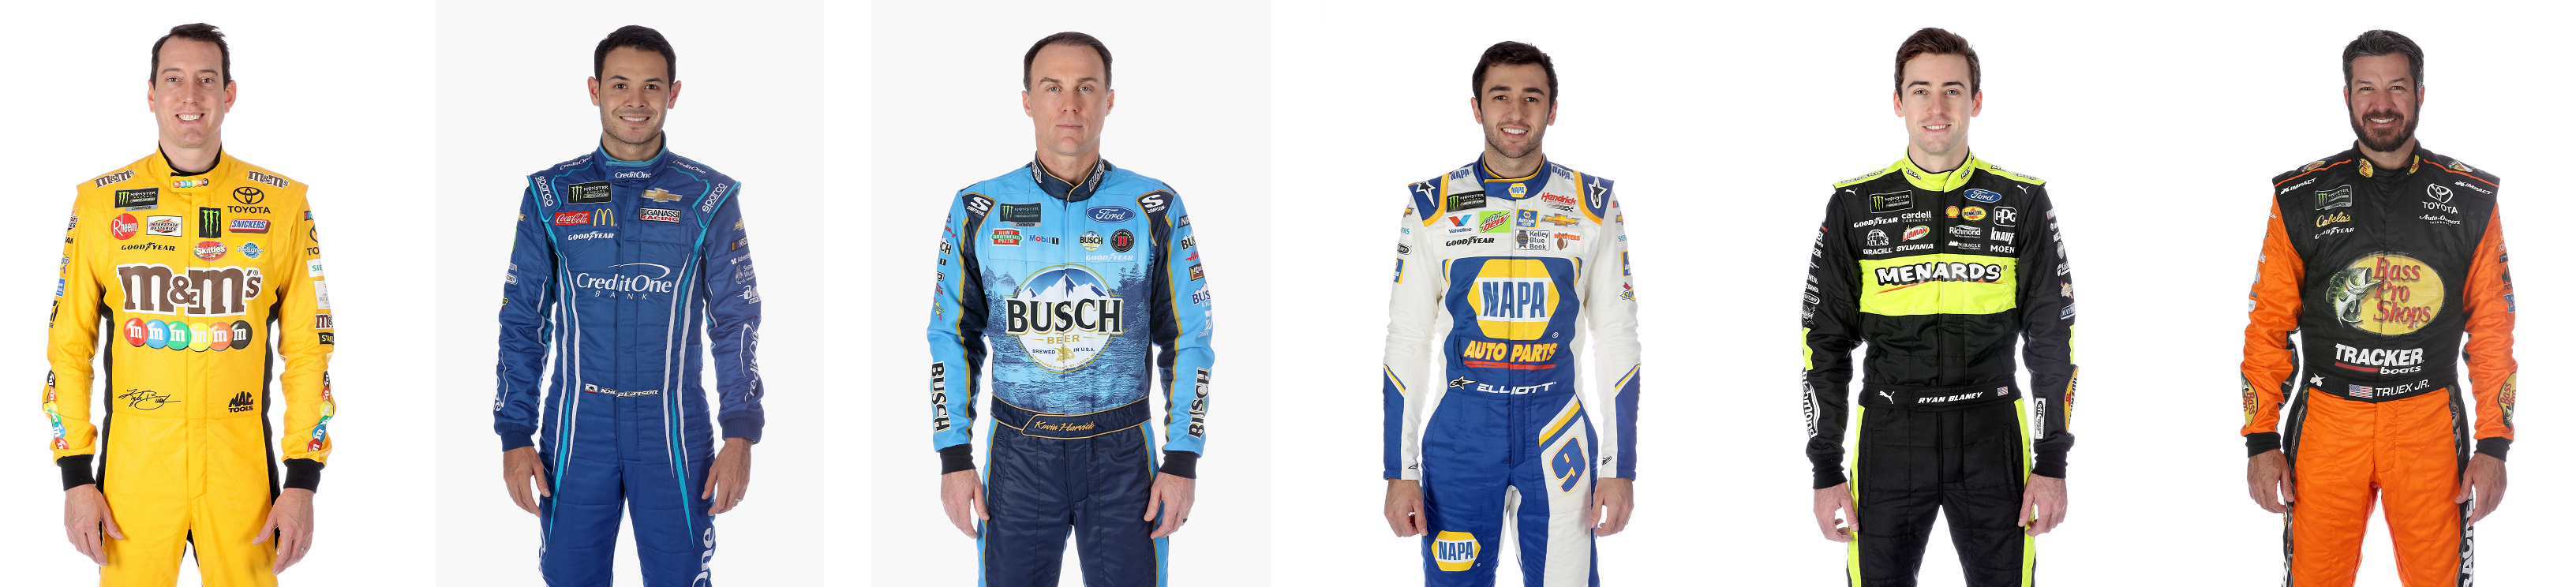 That's six potentially strong picks for today's Auto Club 400.